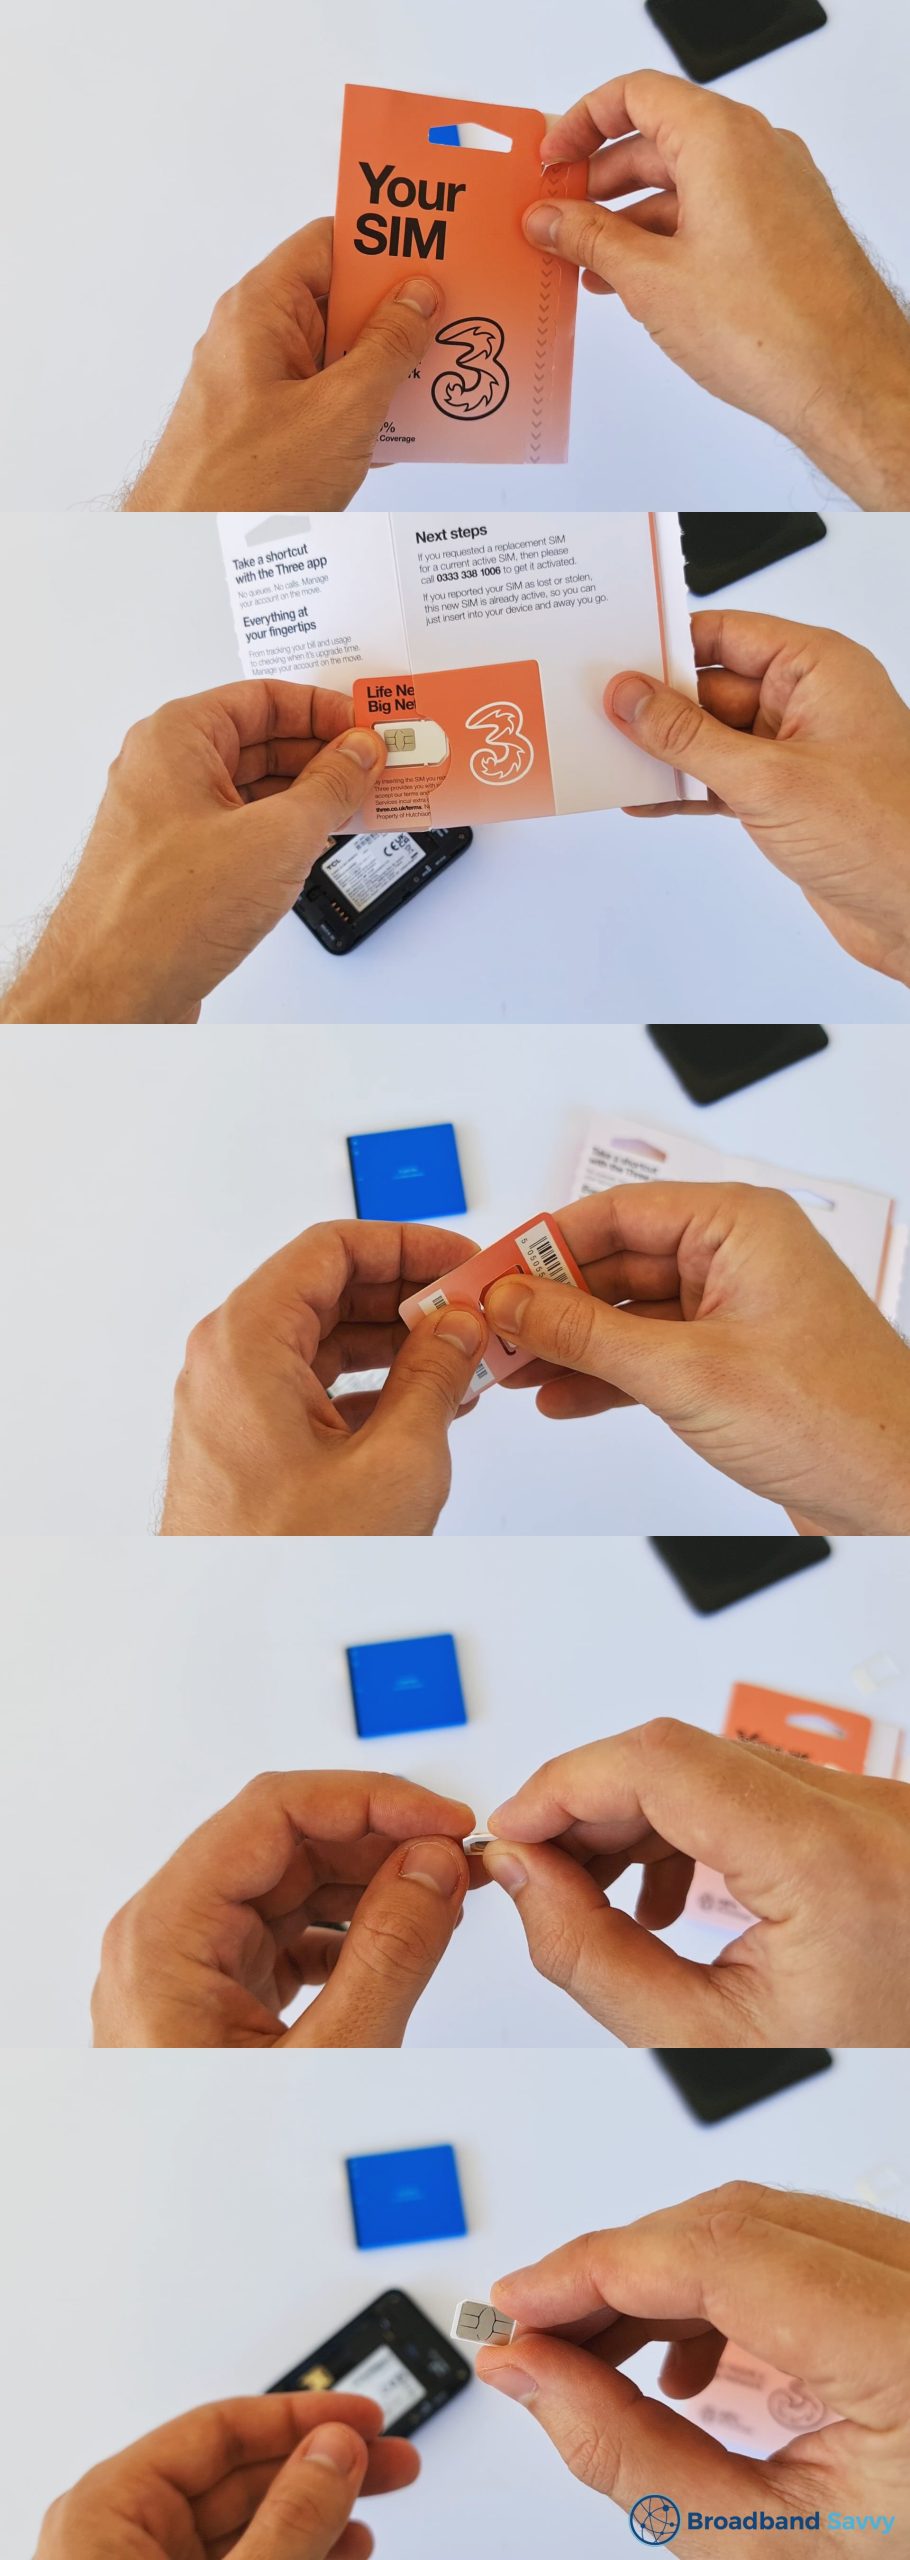 Getting the nano SIM card from its packaging.